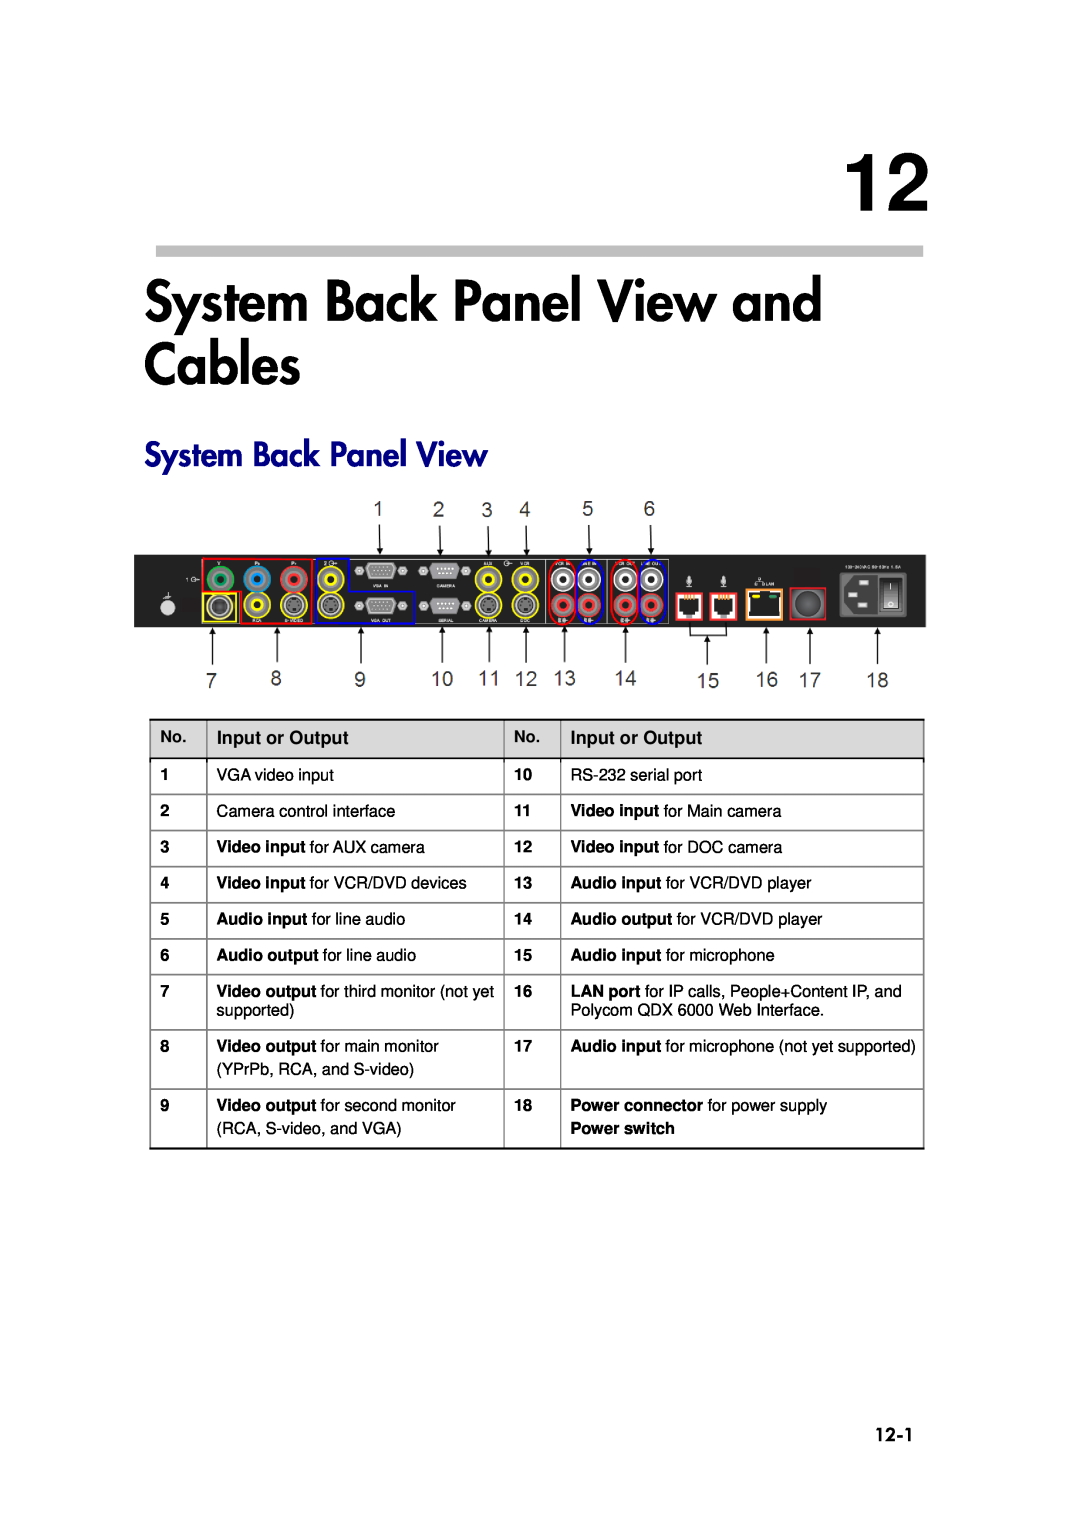 Polycom 6000 manual System Back Panel View and Cables, Input or Output, 12-1 